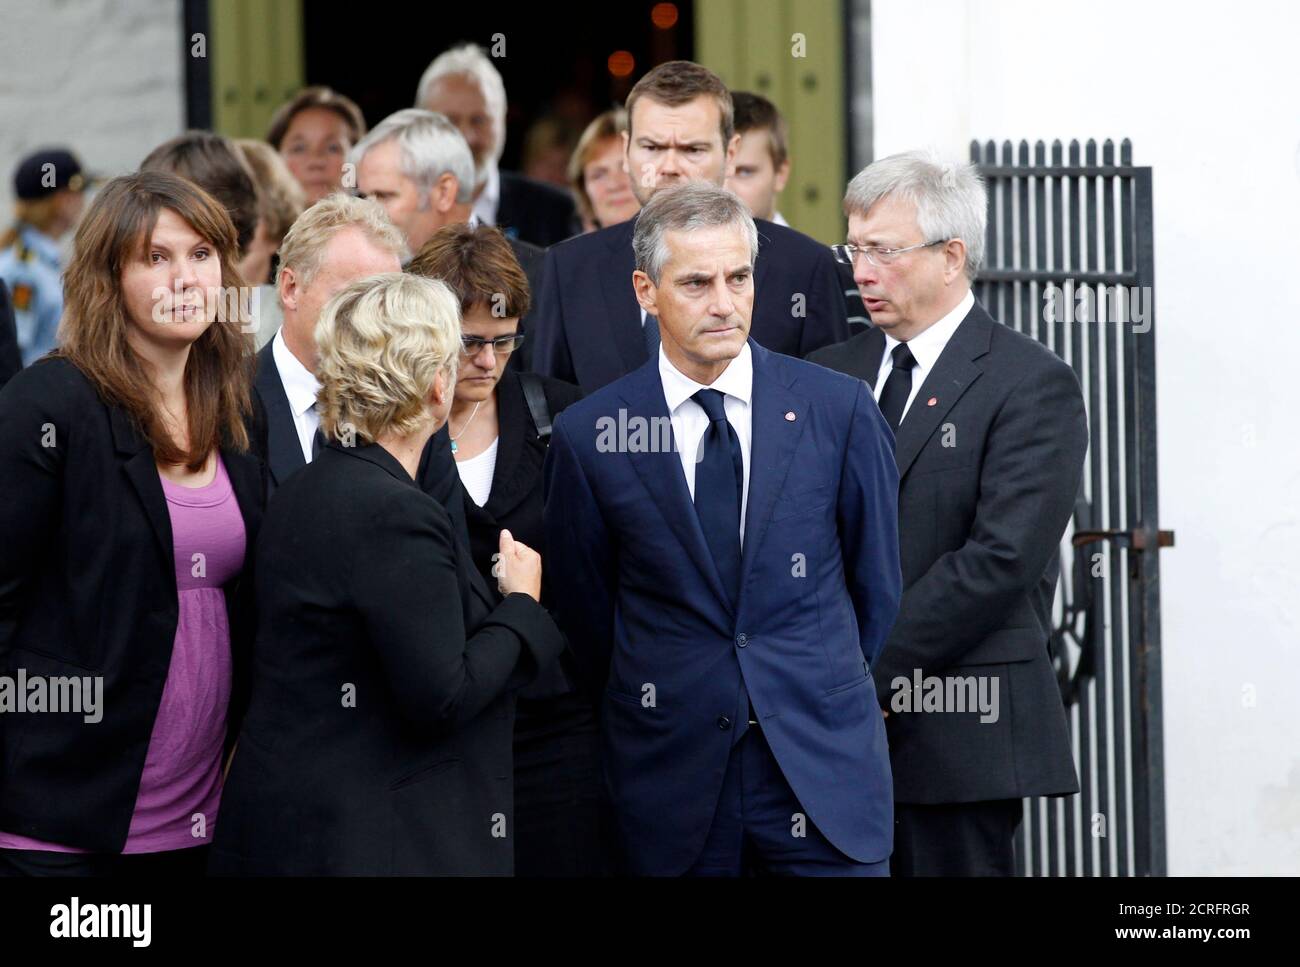 Norwegian Foreign Minister Jonas Gahr Store (2nd R) and relatives leave after a memorial service for the victims of a rampage on nearby Utoeya island at a church in Sundvollen, July 24, 2011. A right-wing zealot who admitted to bomb and gun attacks in Norway that killed 92 people on Friday claims he acted alone, Norway's police said on Sunday.  REUTERS/Fabrizio Bensch (NORWAY - Tags: CIVIL UNREST CRIME LAW POLITICS) Stock Photo